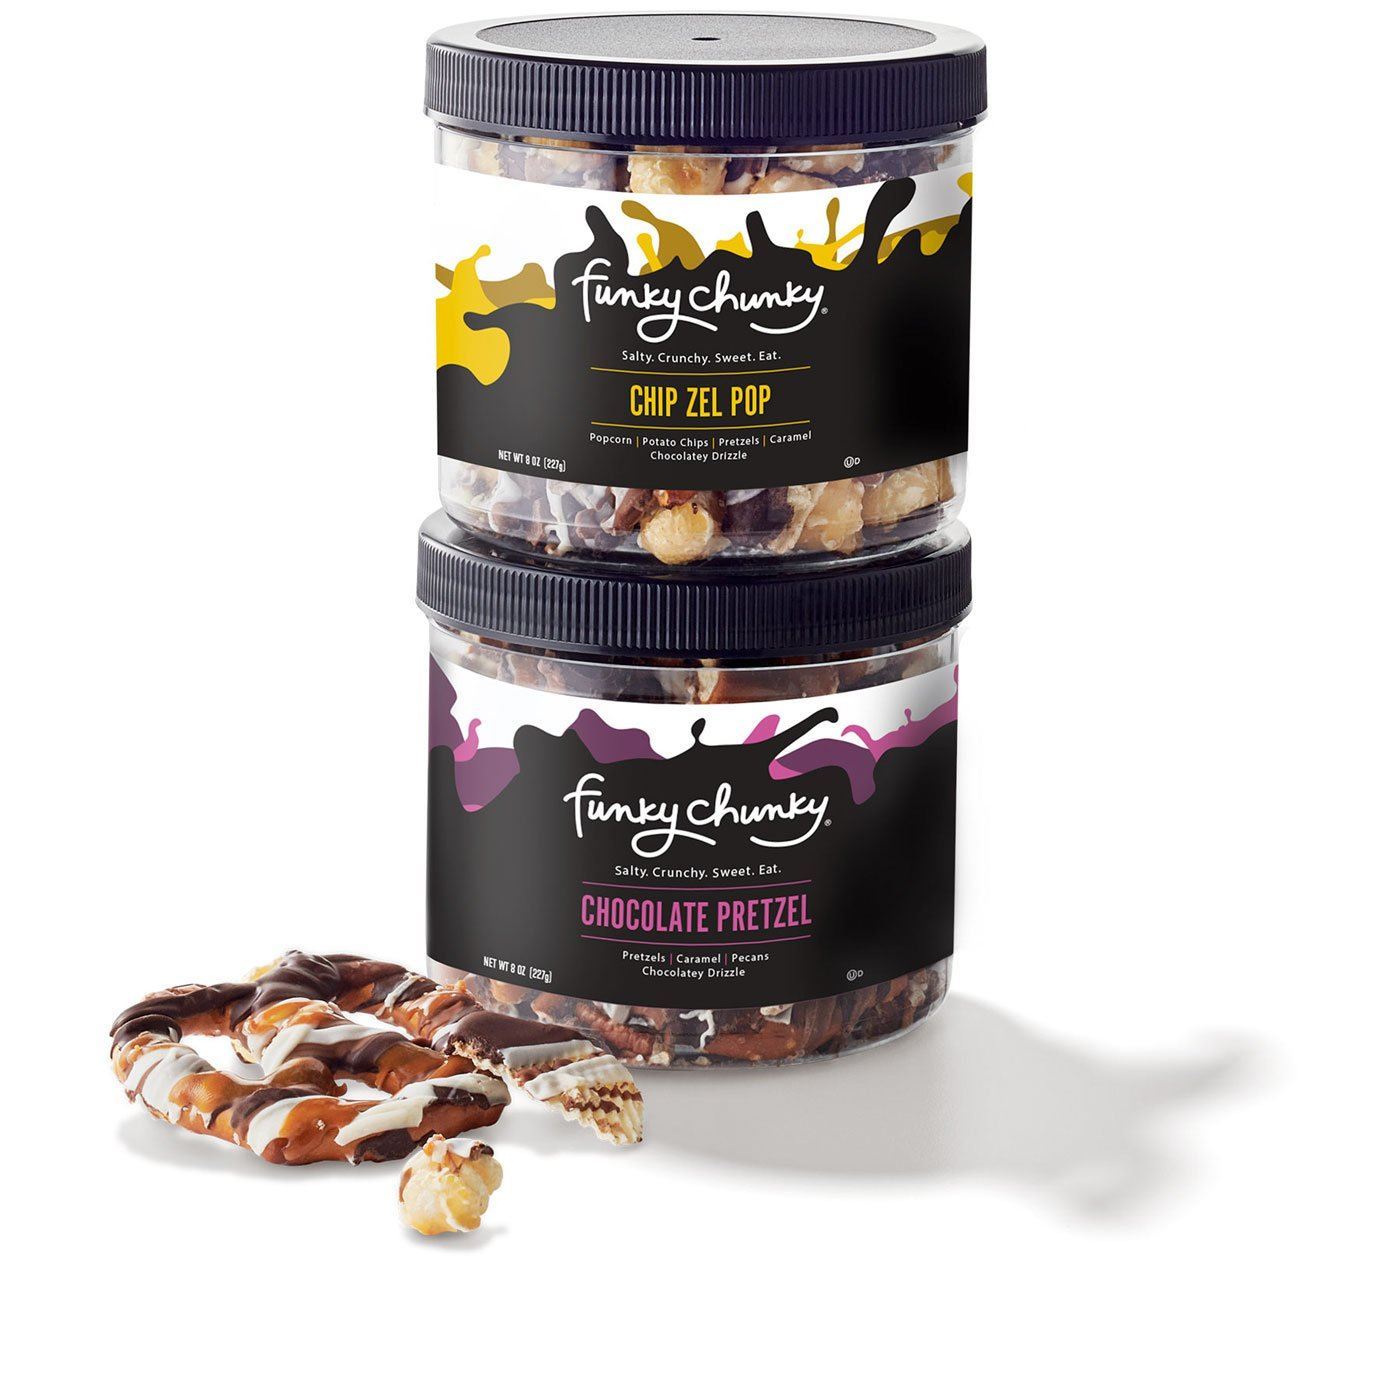 Double Mini Gift Pack-td {border: 1px solid #ccc;}br {mso-data-placement:same-cell;} Features two of our favorite flavors: Chip Zel Pop with crunchy potato chips, salty pretzel sticks and gourmet popcorn drizzled with caramel and three different chocolate-y layers & Chocolate Pretzel with caramel and chopped pecans, drenched in three chocolates. This gift is a terrific way to make someone's day 